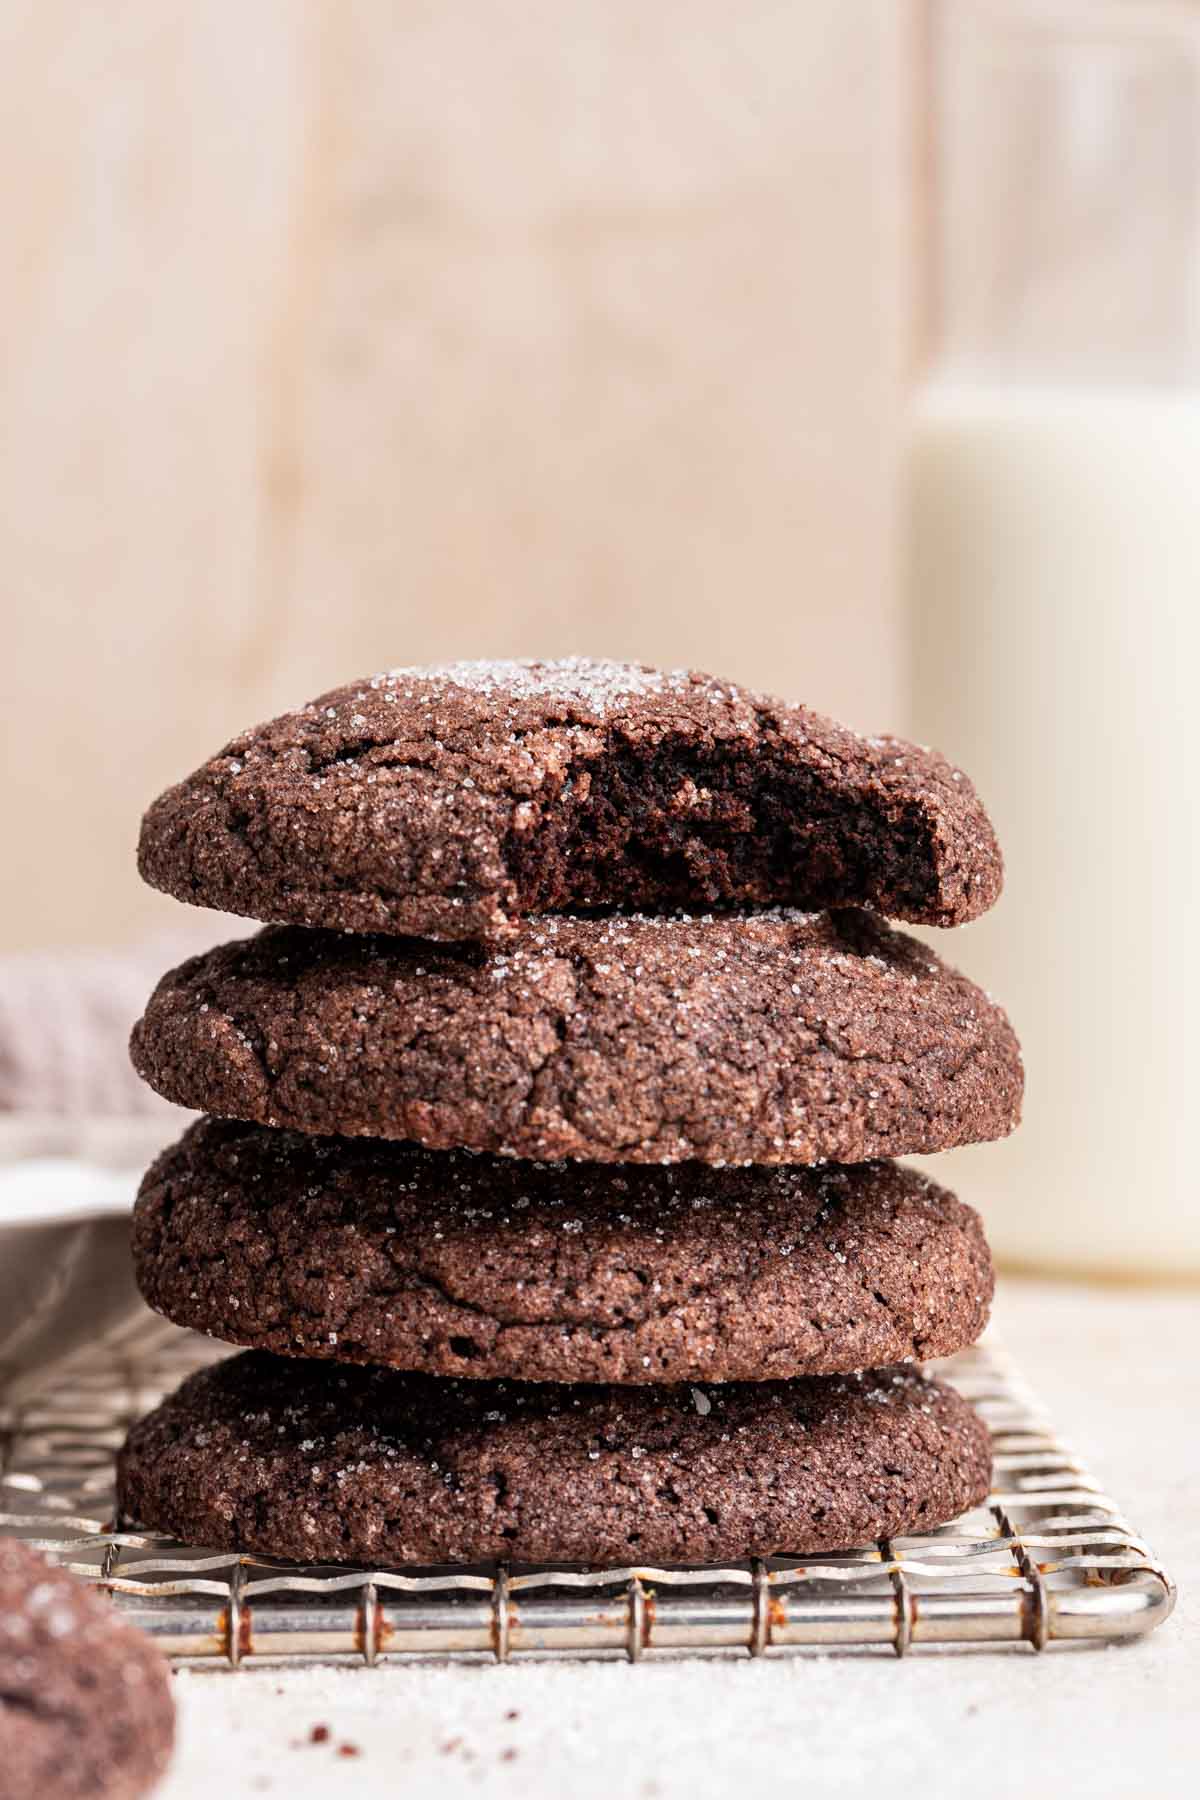 Stack of chocolate sugar cookies with bite missing from top one.